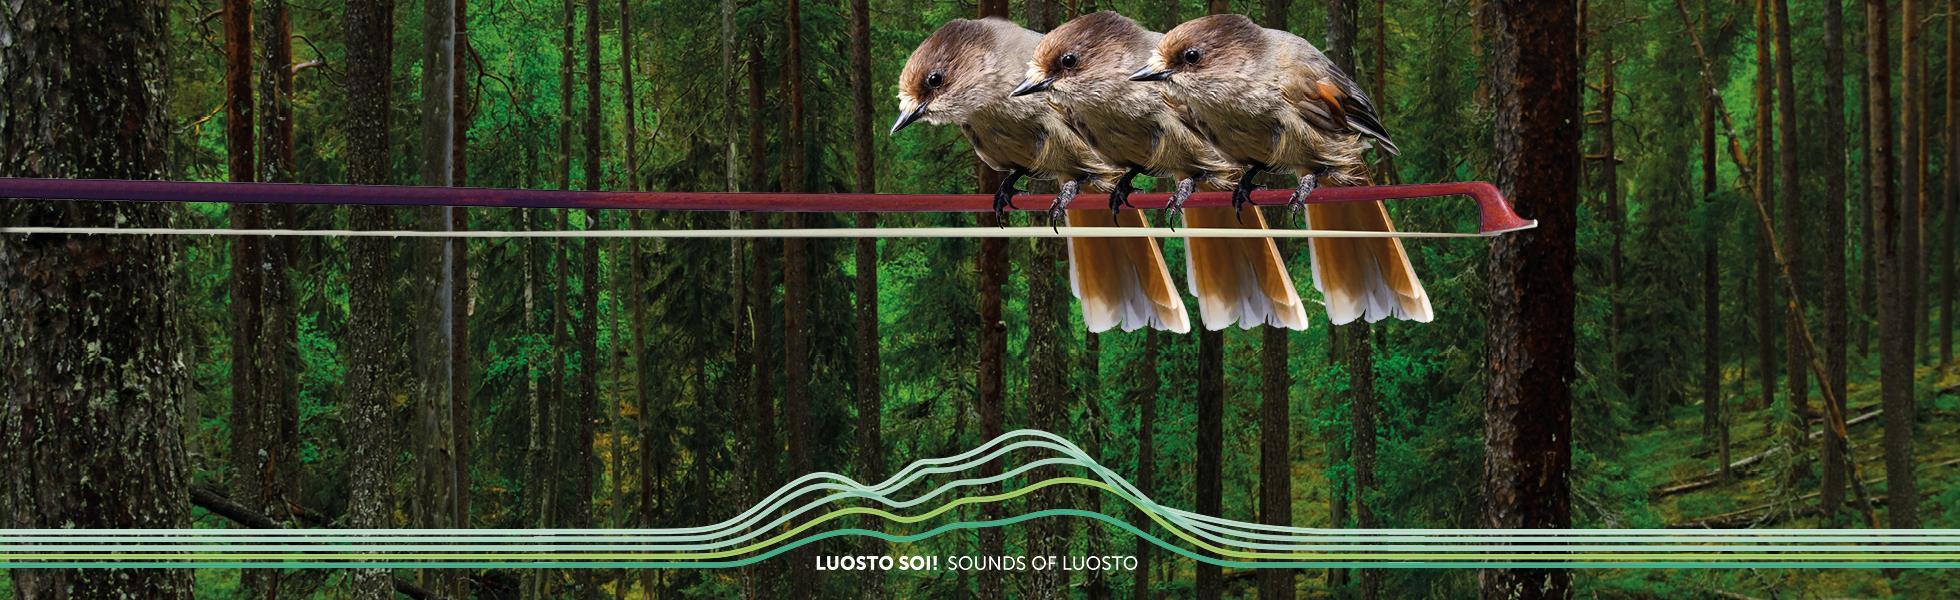 Sounds of Luosto -festival 29.7.-1.8.2021